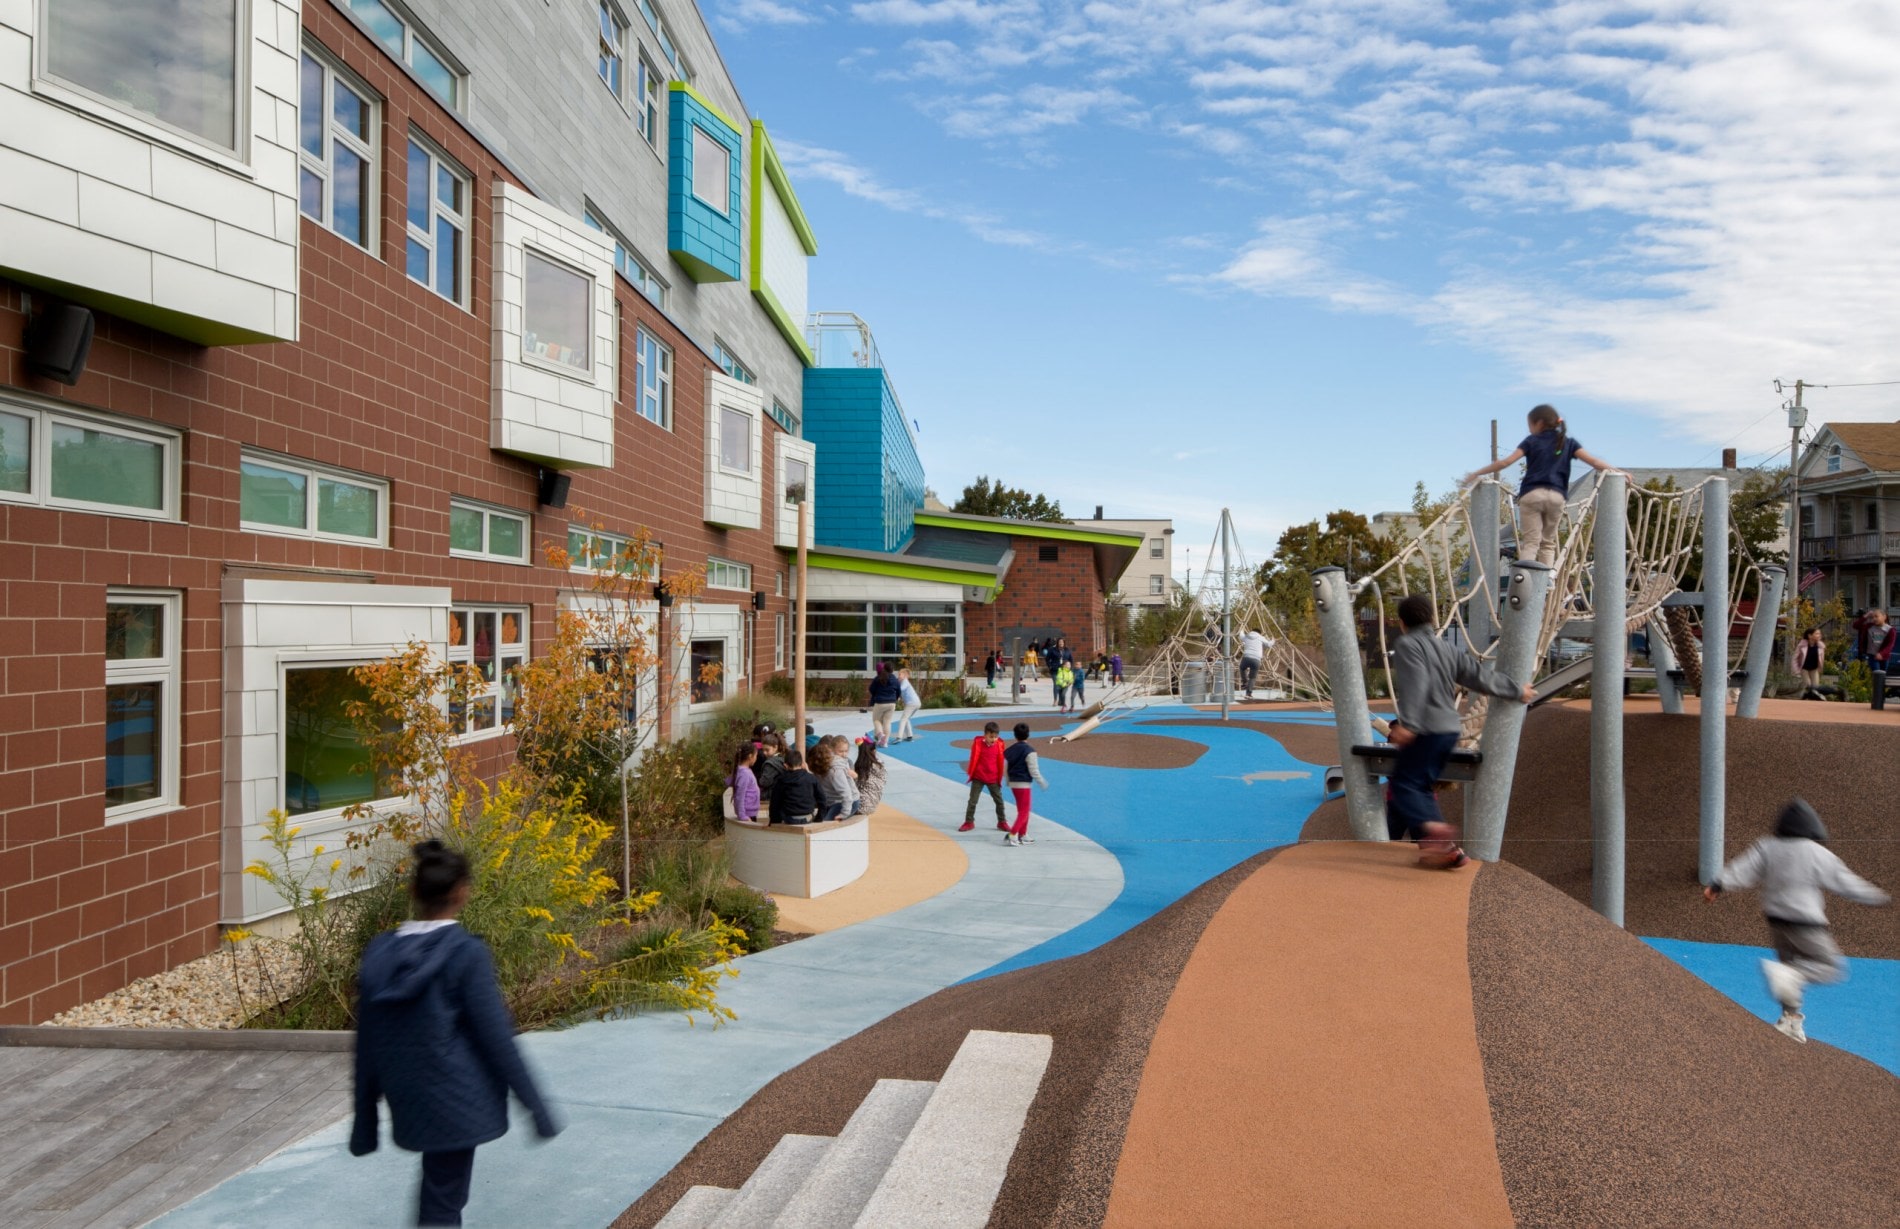 Students are seen running around a new ocean-themed adventure playground outside of Jacobs Elementary school, including a rope bridge over a blue rubberized safety surface that looks like a river running between islands.